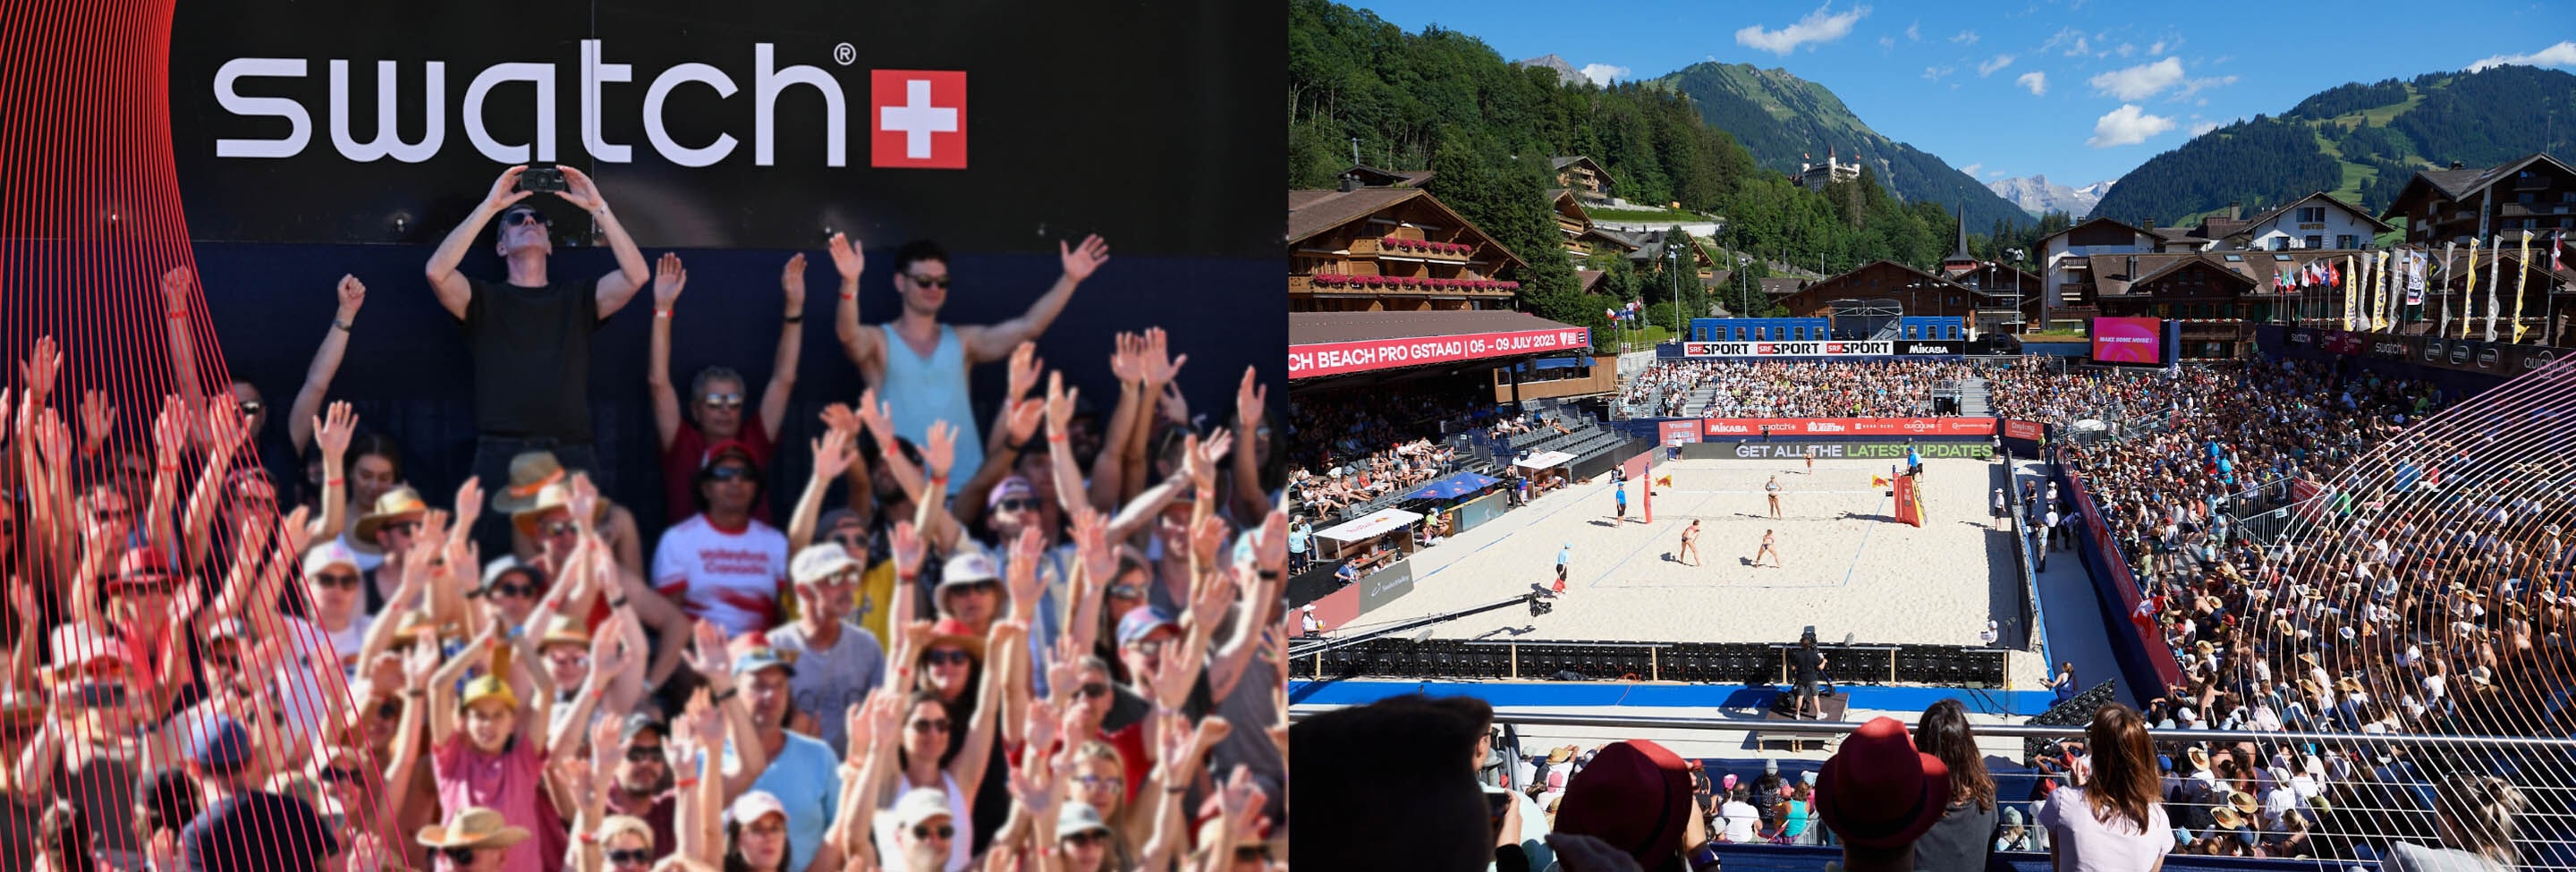 Crowd cheering the beach volley game at Swatch Beach Pro Gstaad